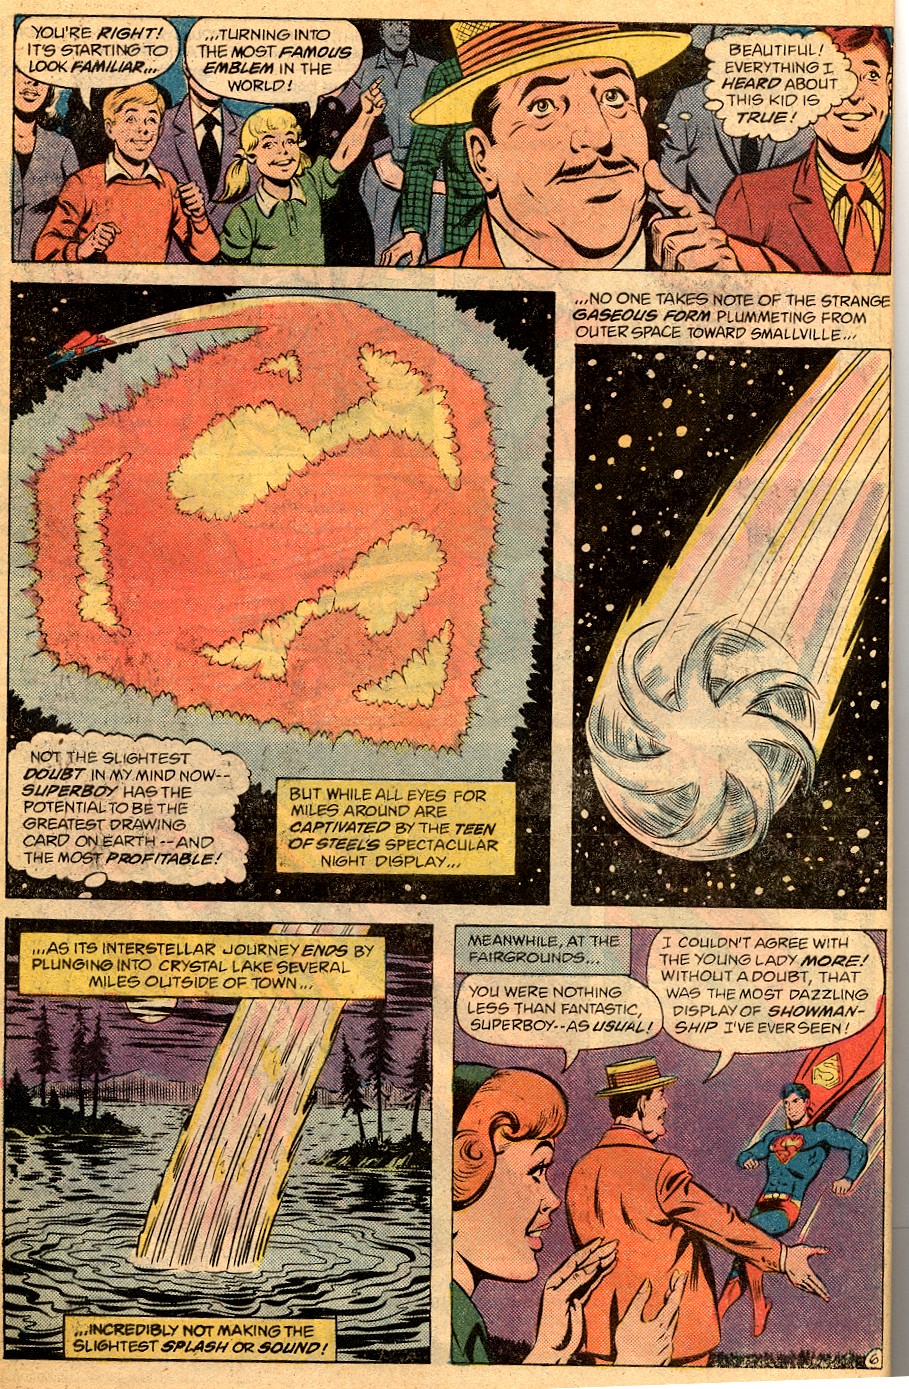 The New Adventures of Superboy 21 Page 9